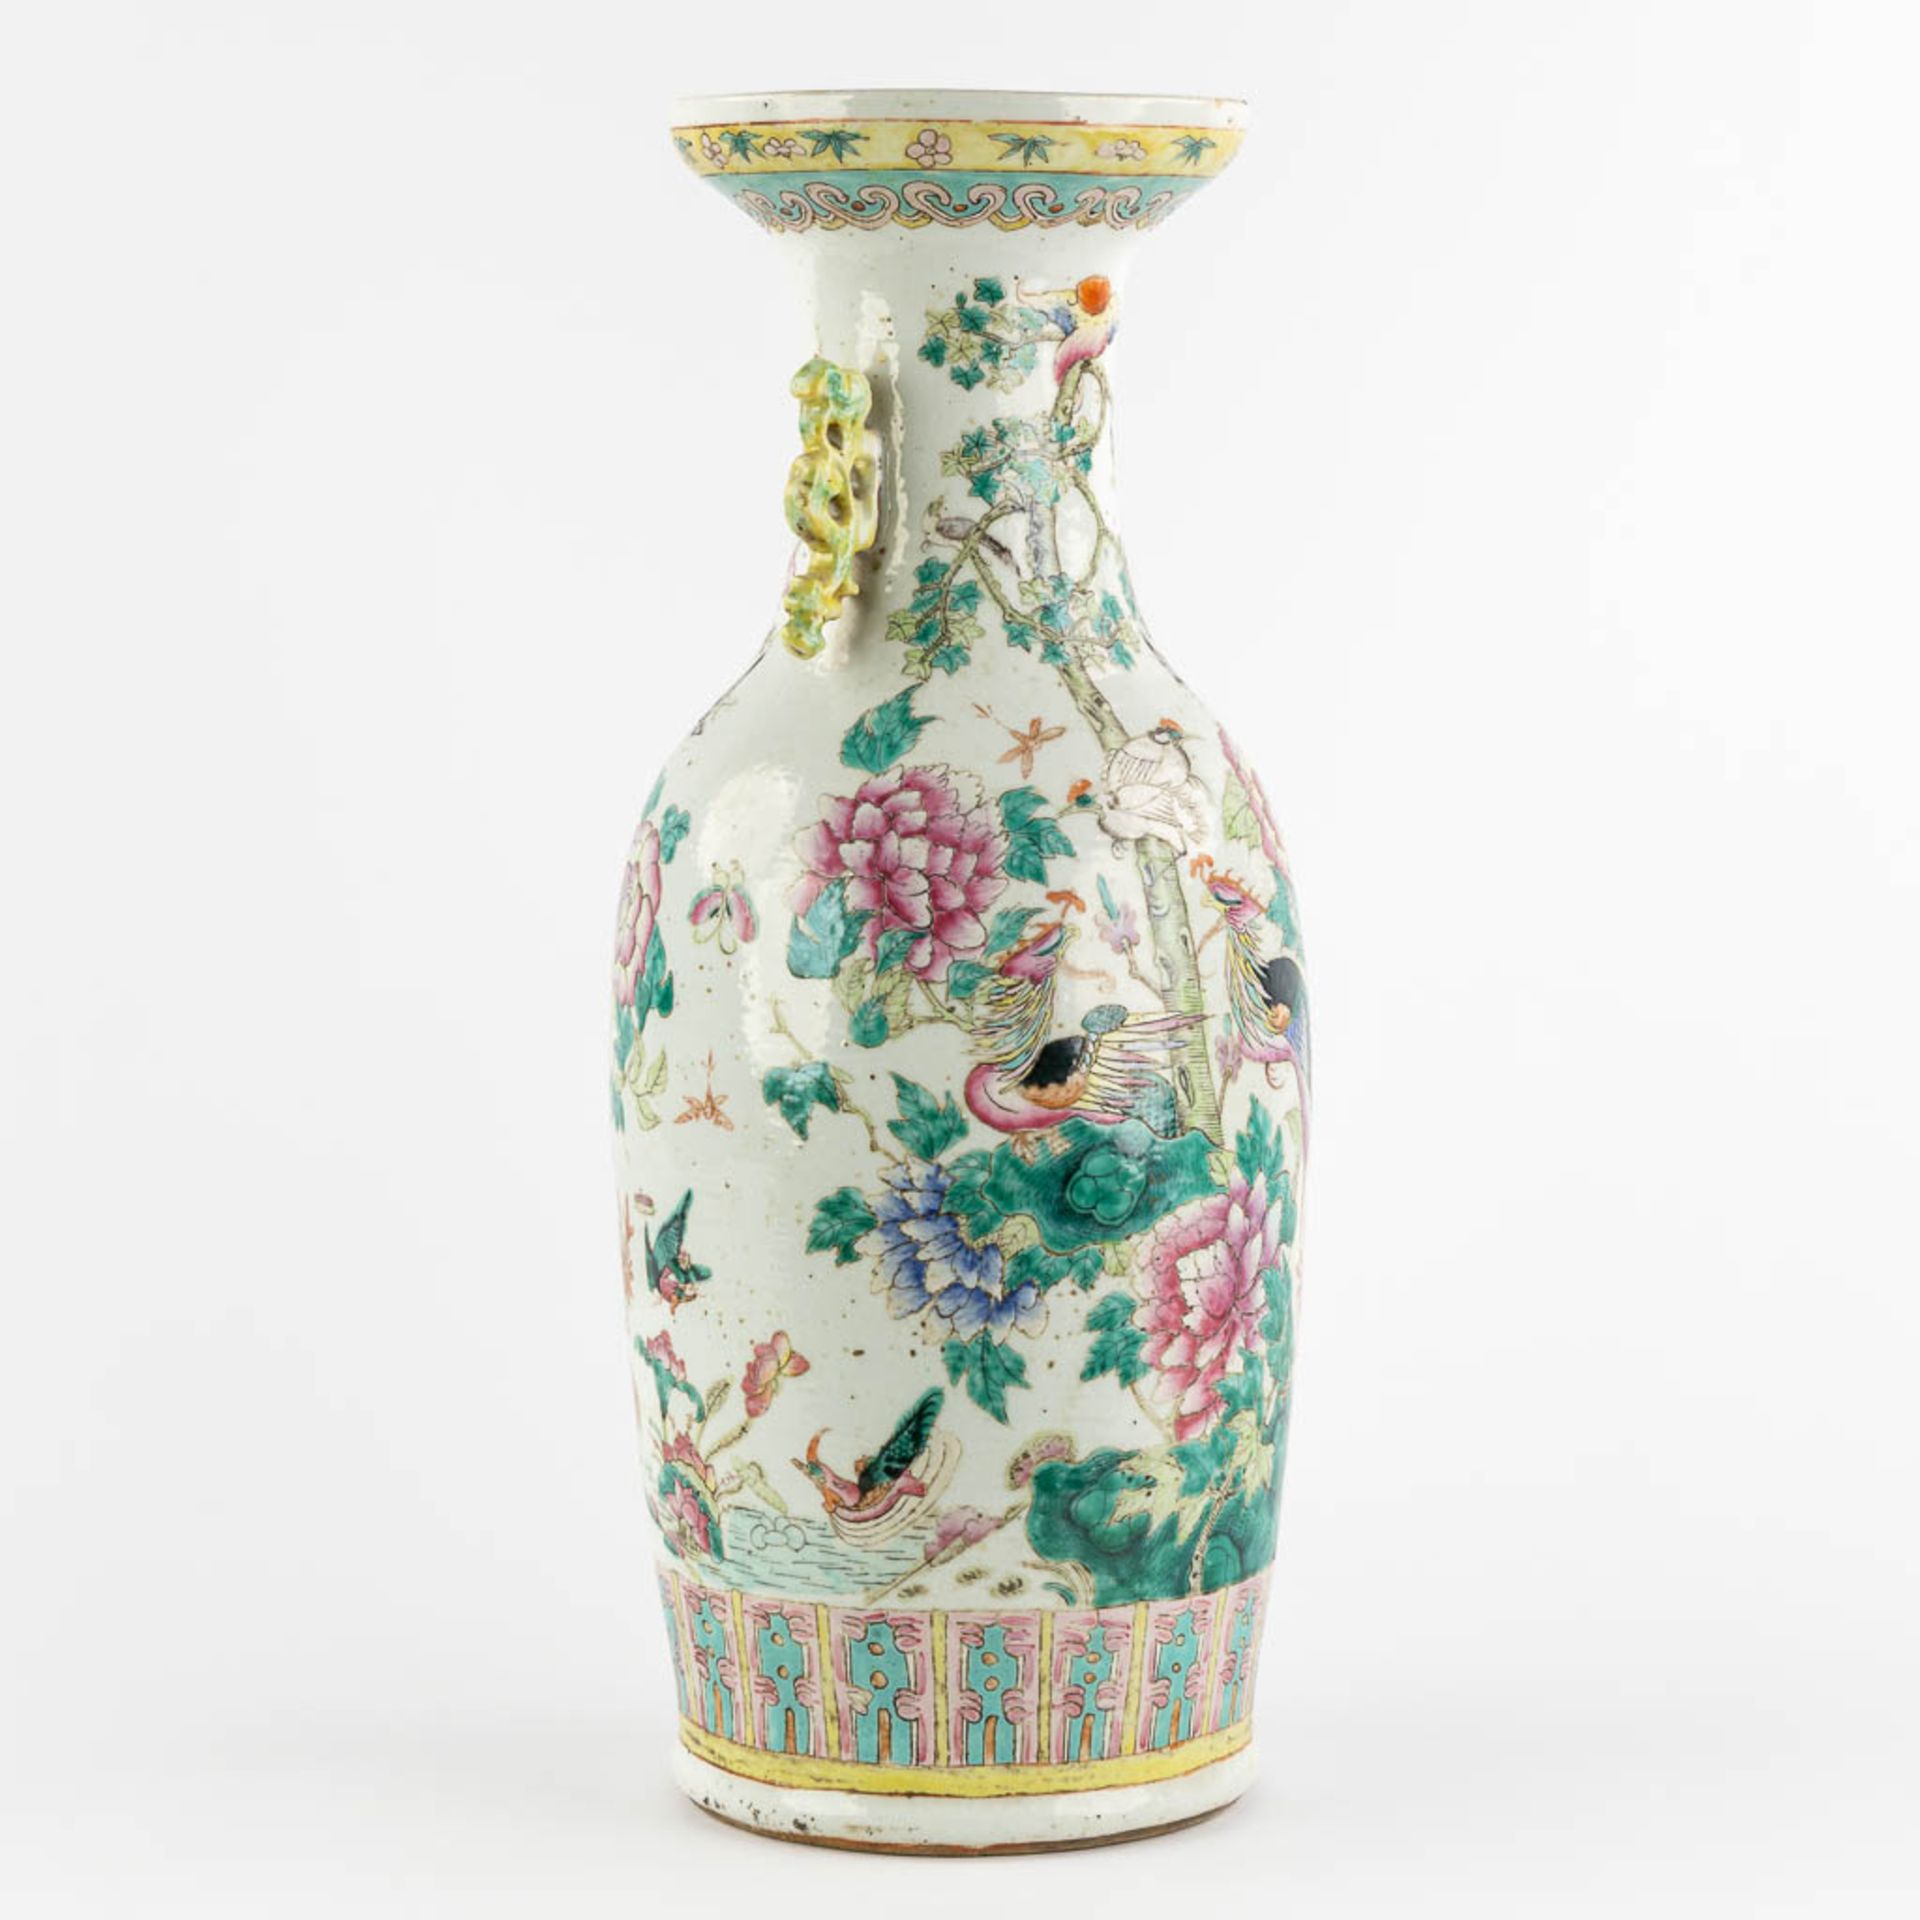 A Chinese Vase, Famille Rose decorated with Fauna and Flora. (H:60 x D:25 cm) - Image 3 of 12